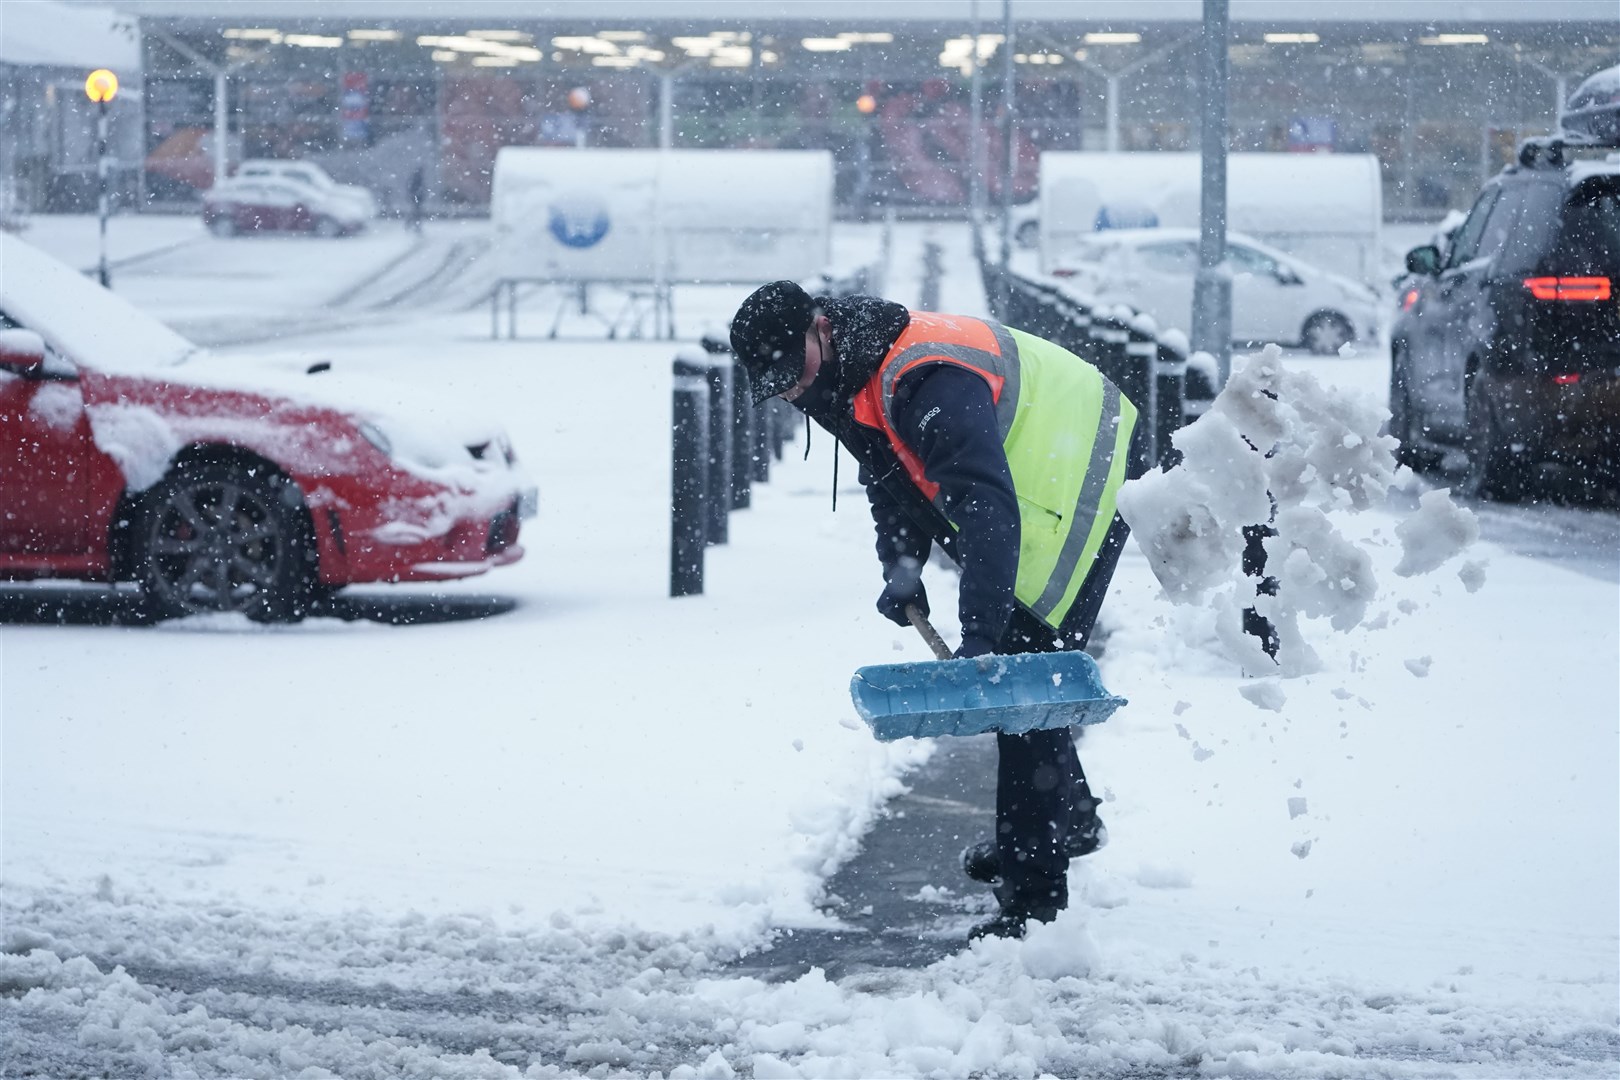 A member of staff from Tesco shovels snow outside the store in Hexham, Northumberland (Owen Humphreys/PA)